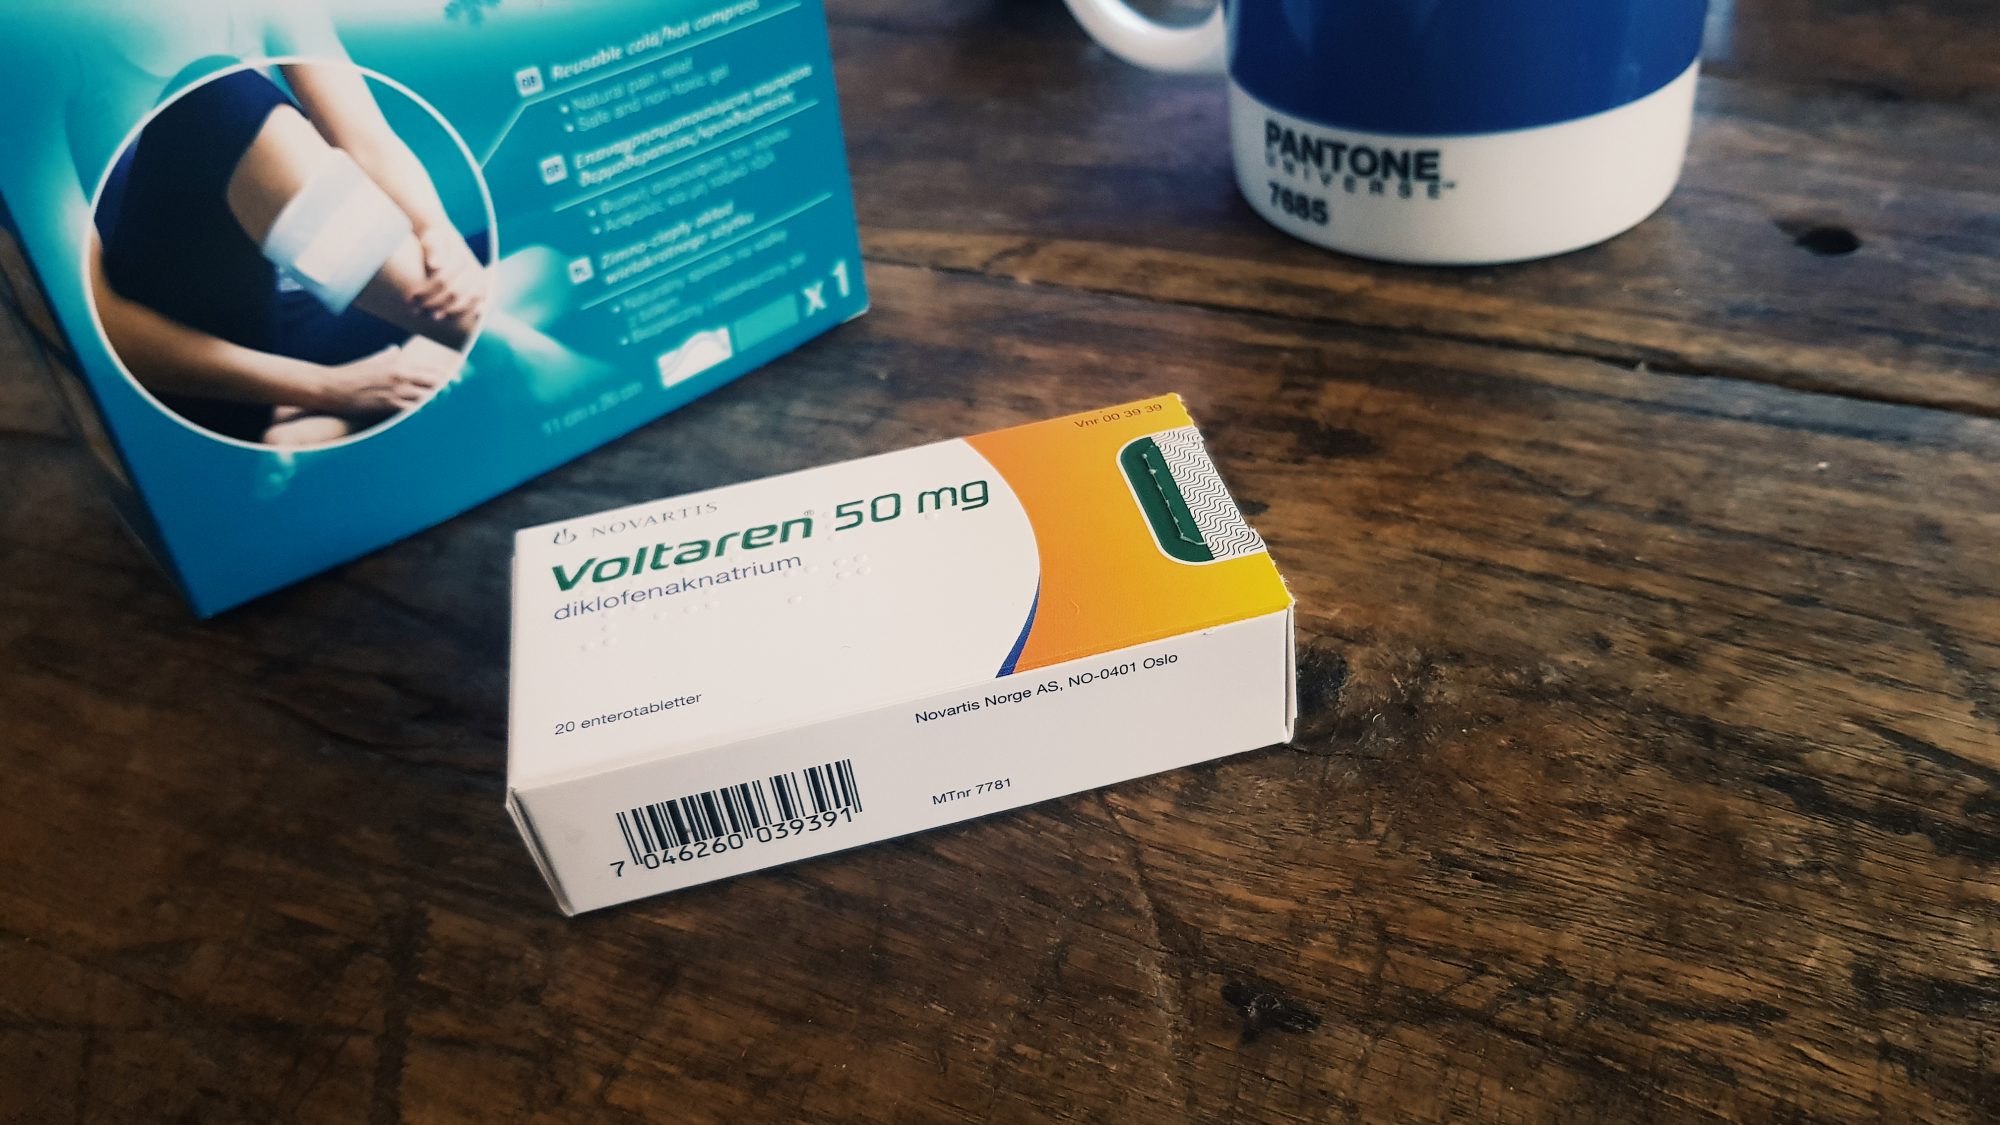 A packet of medicine on a table top, alongside a cup of tea. The medicine packet is in Norwegian language and reads 